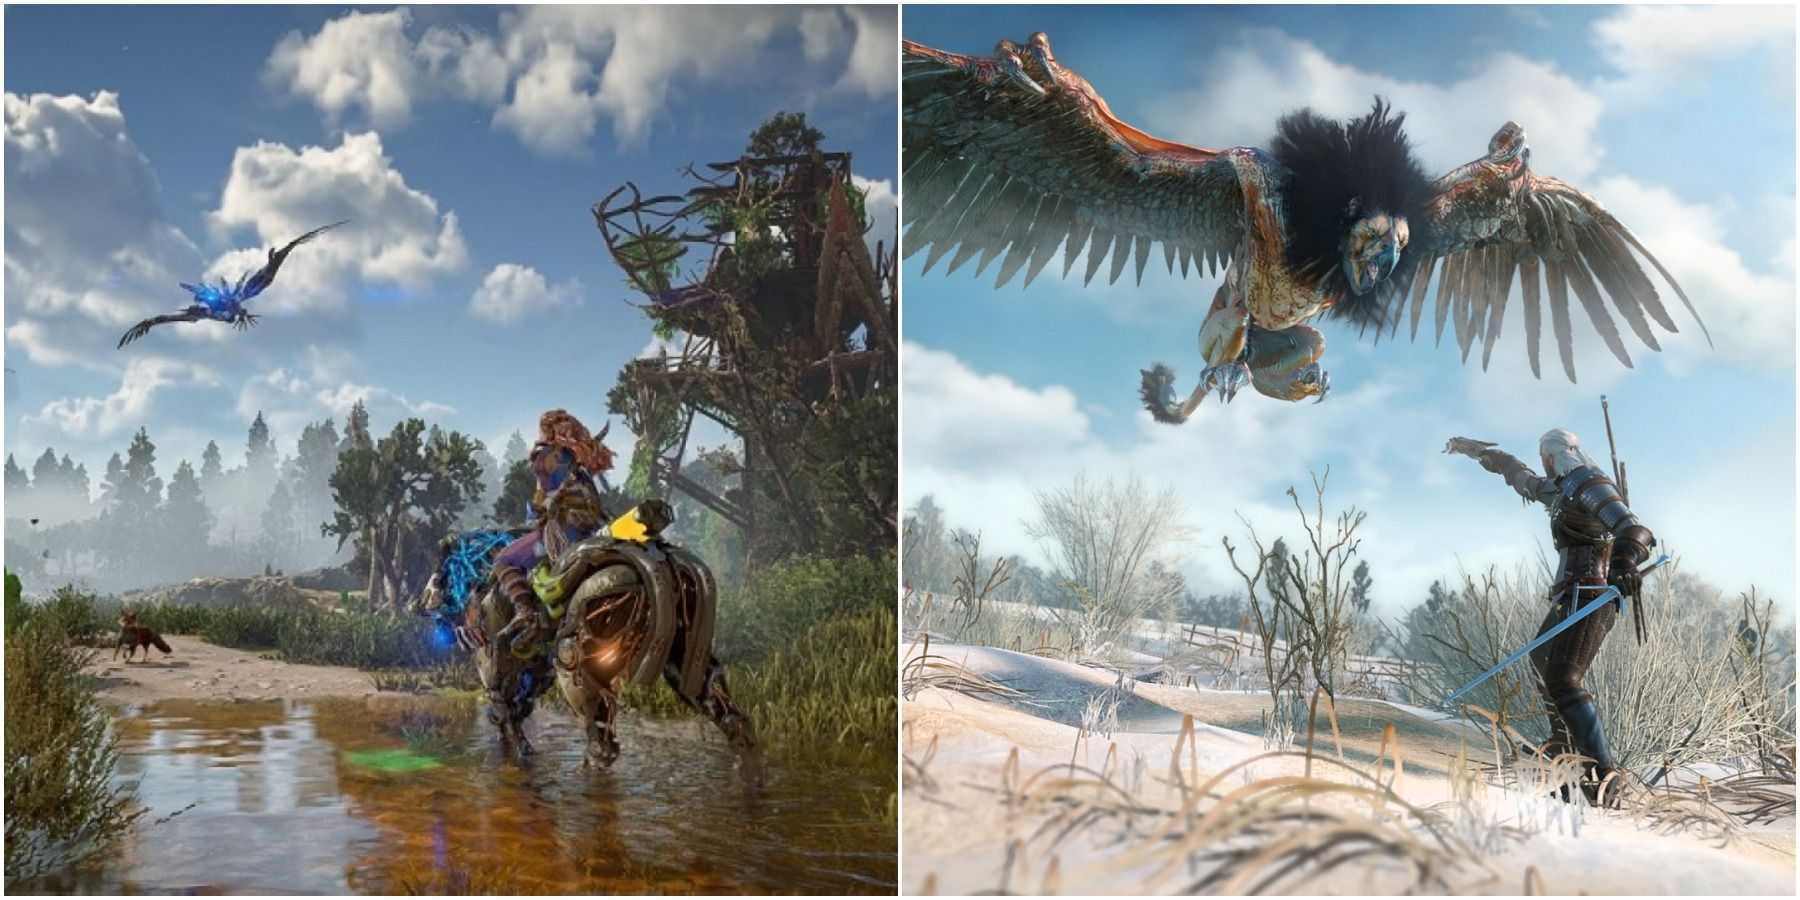 (Left) Aloy riding acorss shallow water (Right) Geralt fighting a Griffin